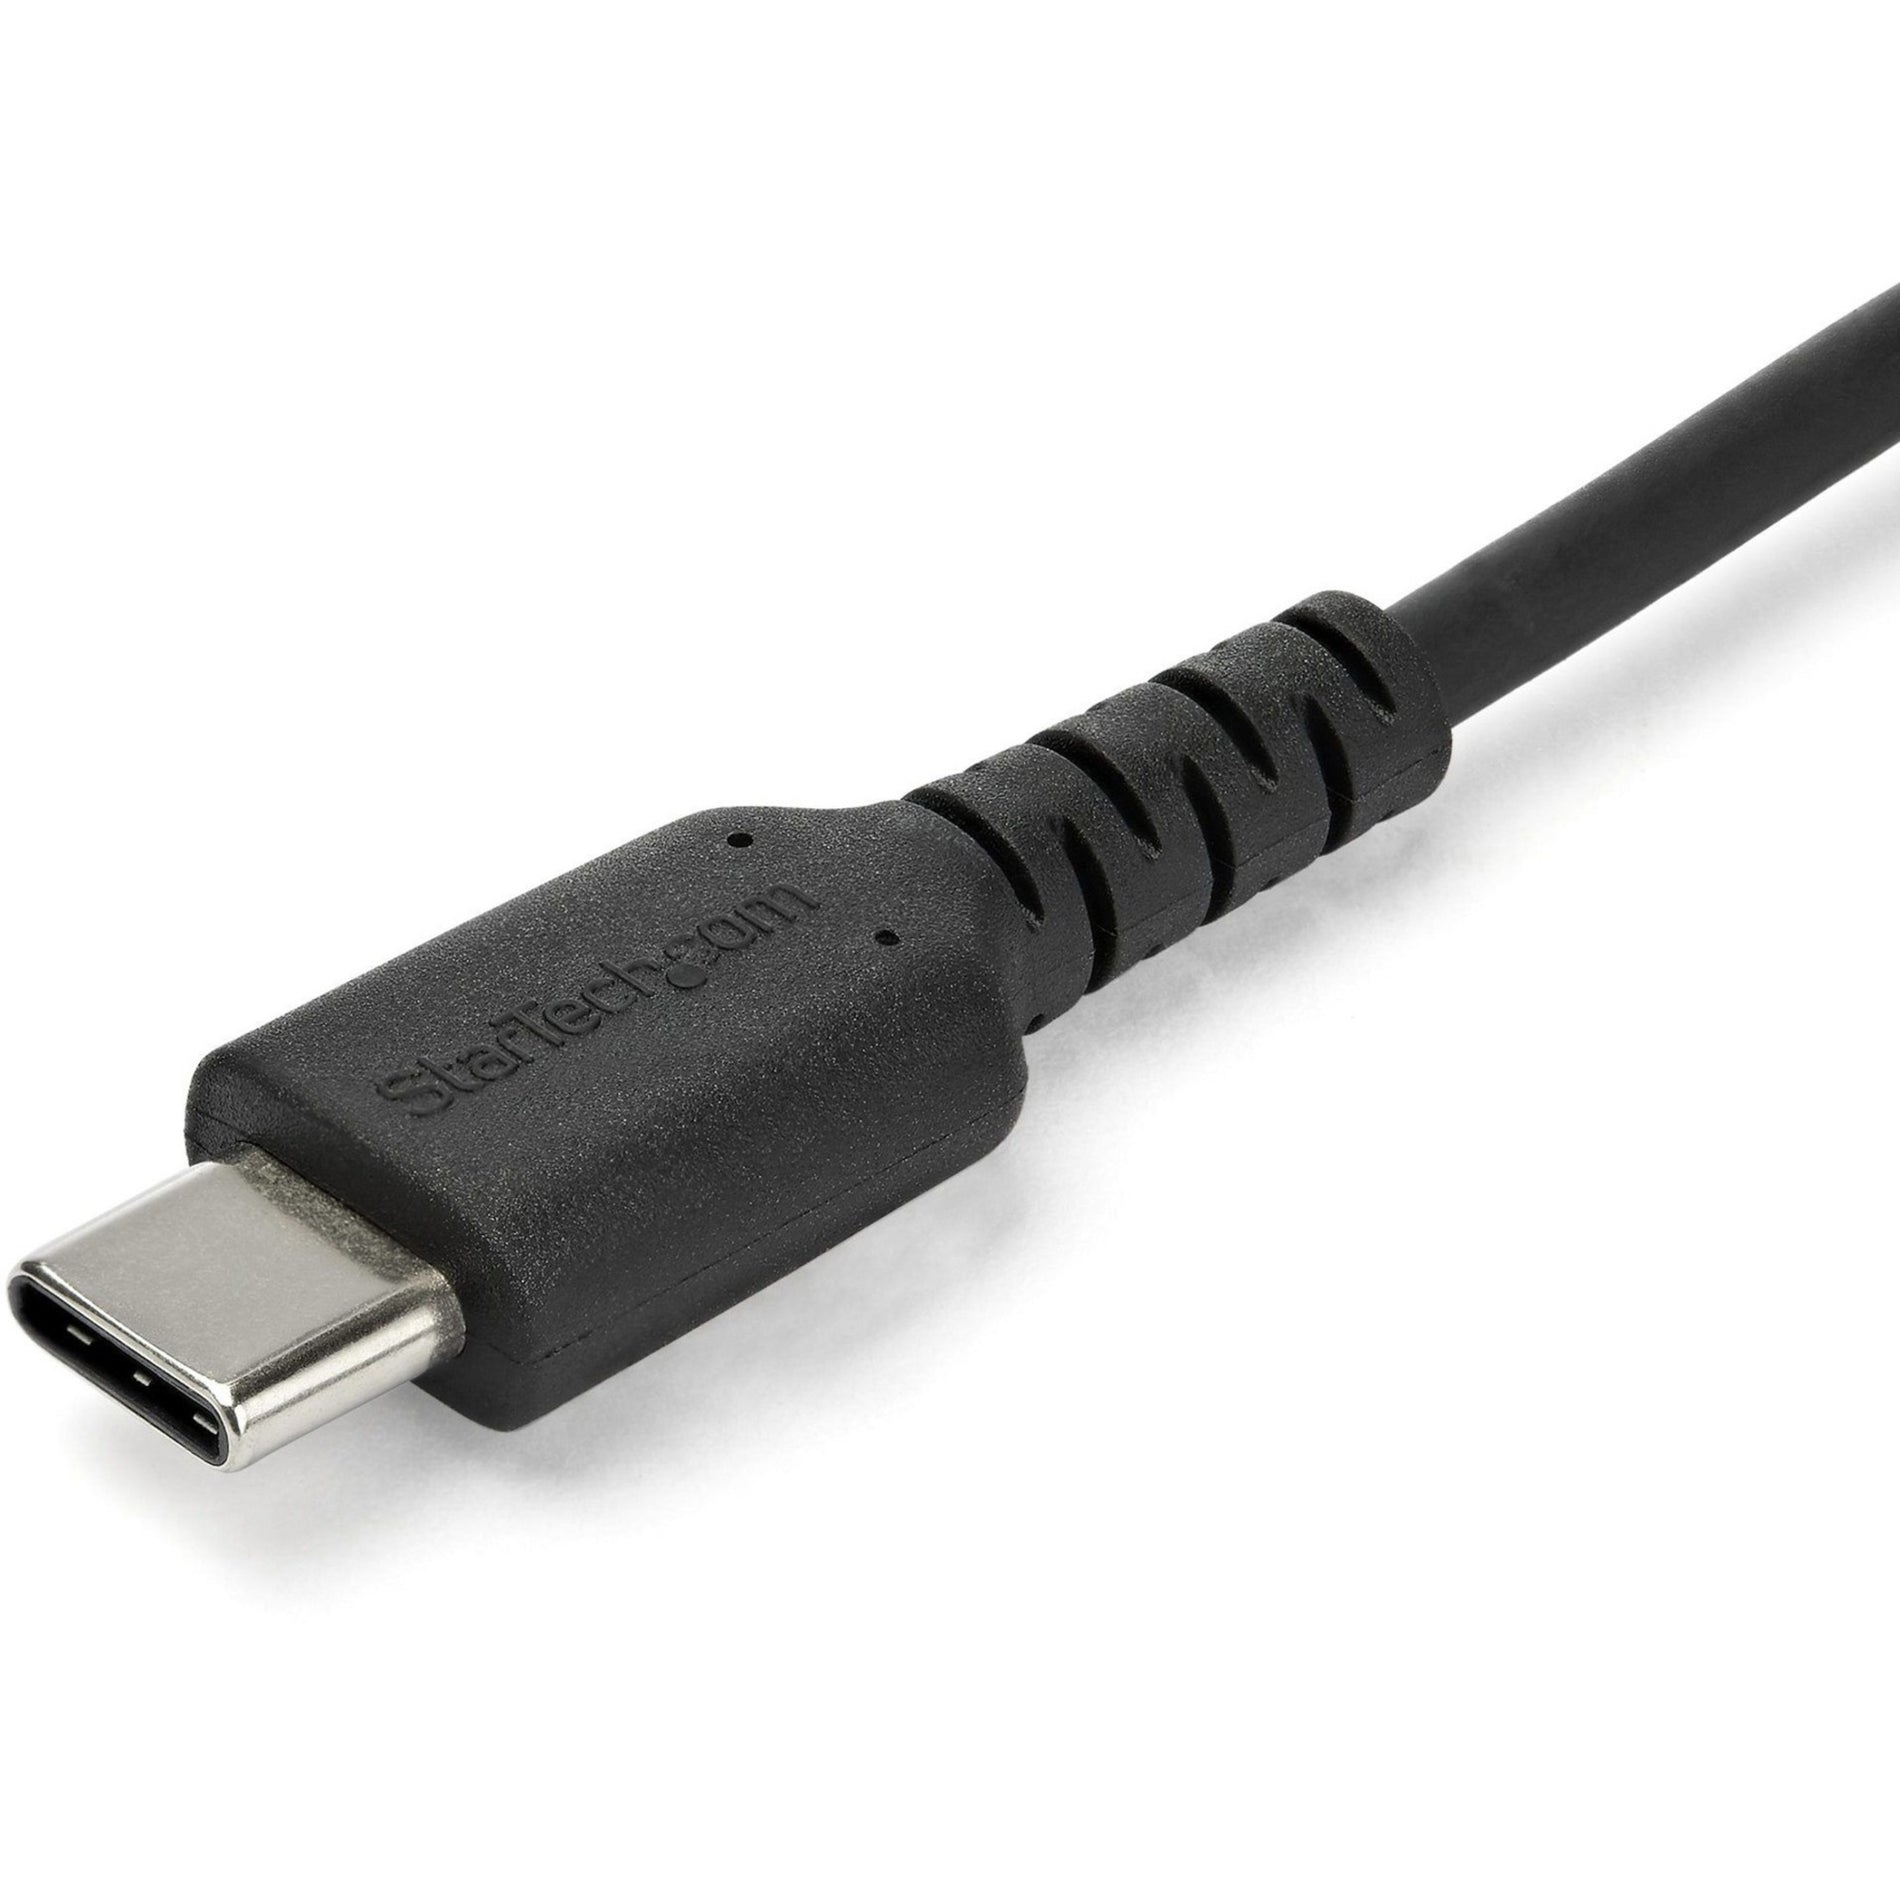 StarTech.com RUSB2AC1MB 1 m (3.3 ft.) USB 2.0 to USB C Cable, High Quality USB Cable, Black, USB Data Transfer Cable